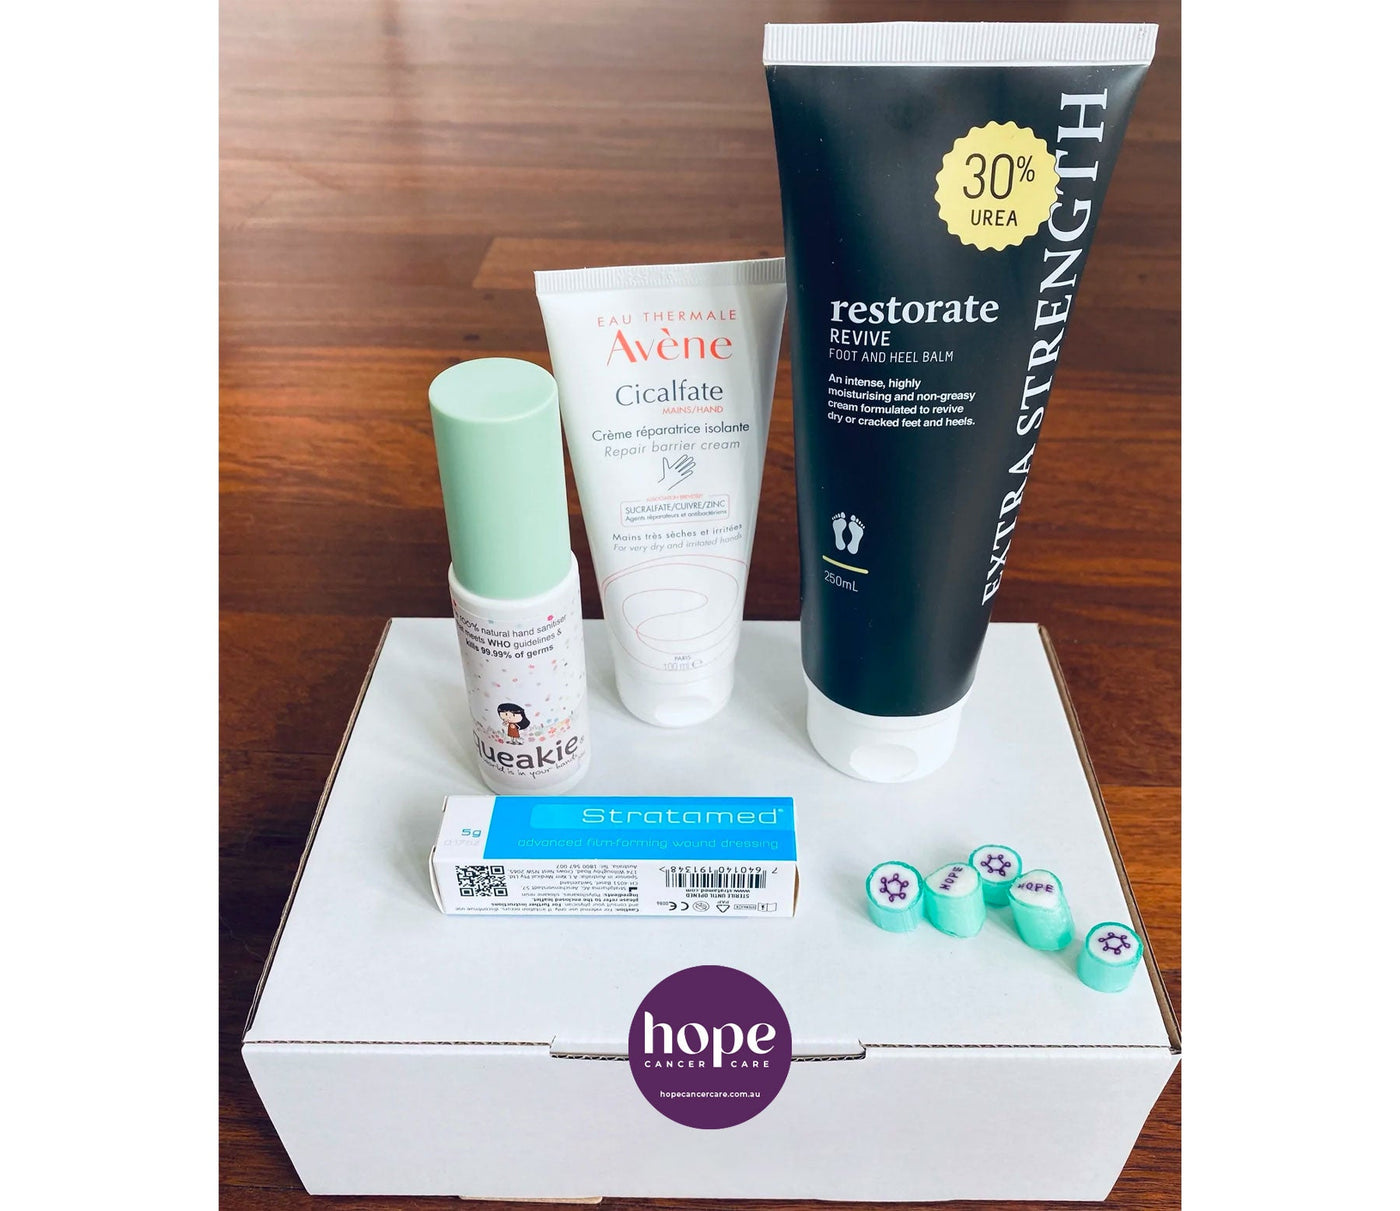 The HOPE Deluxe Hand & Foot Care Pack